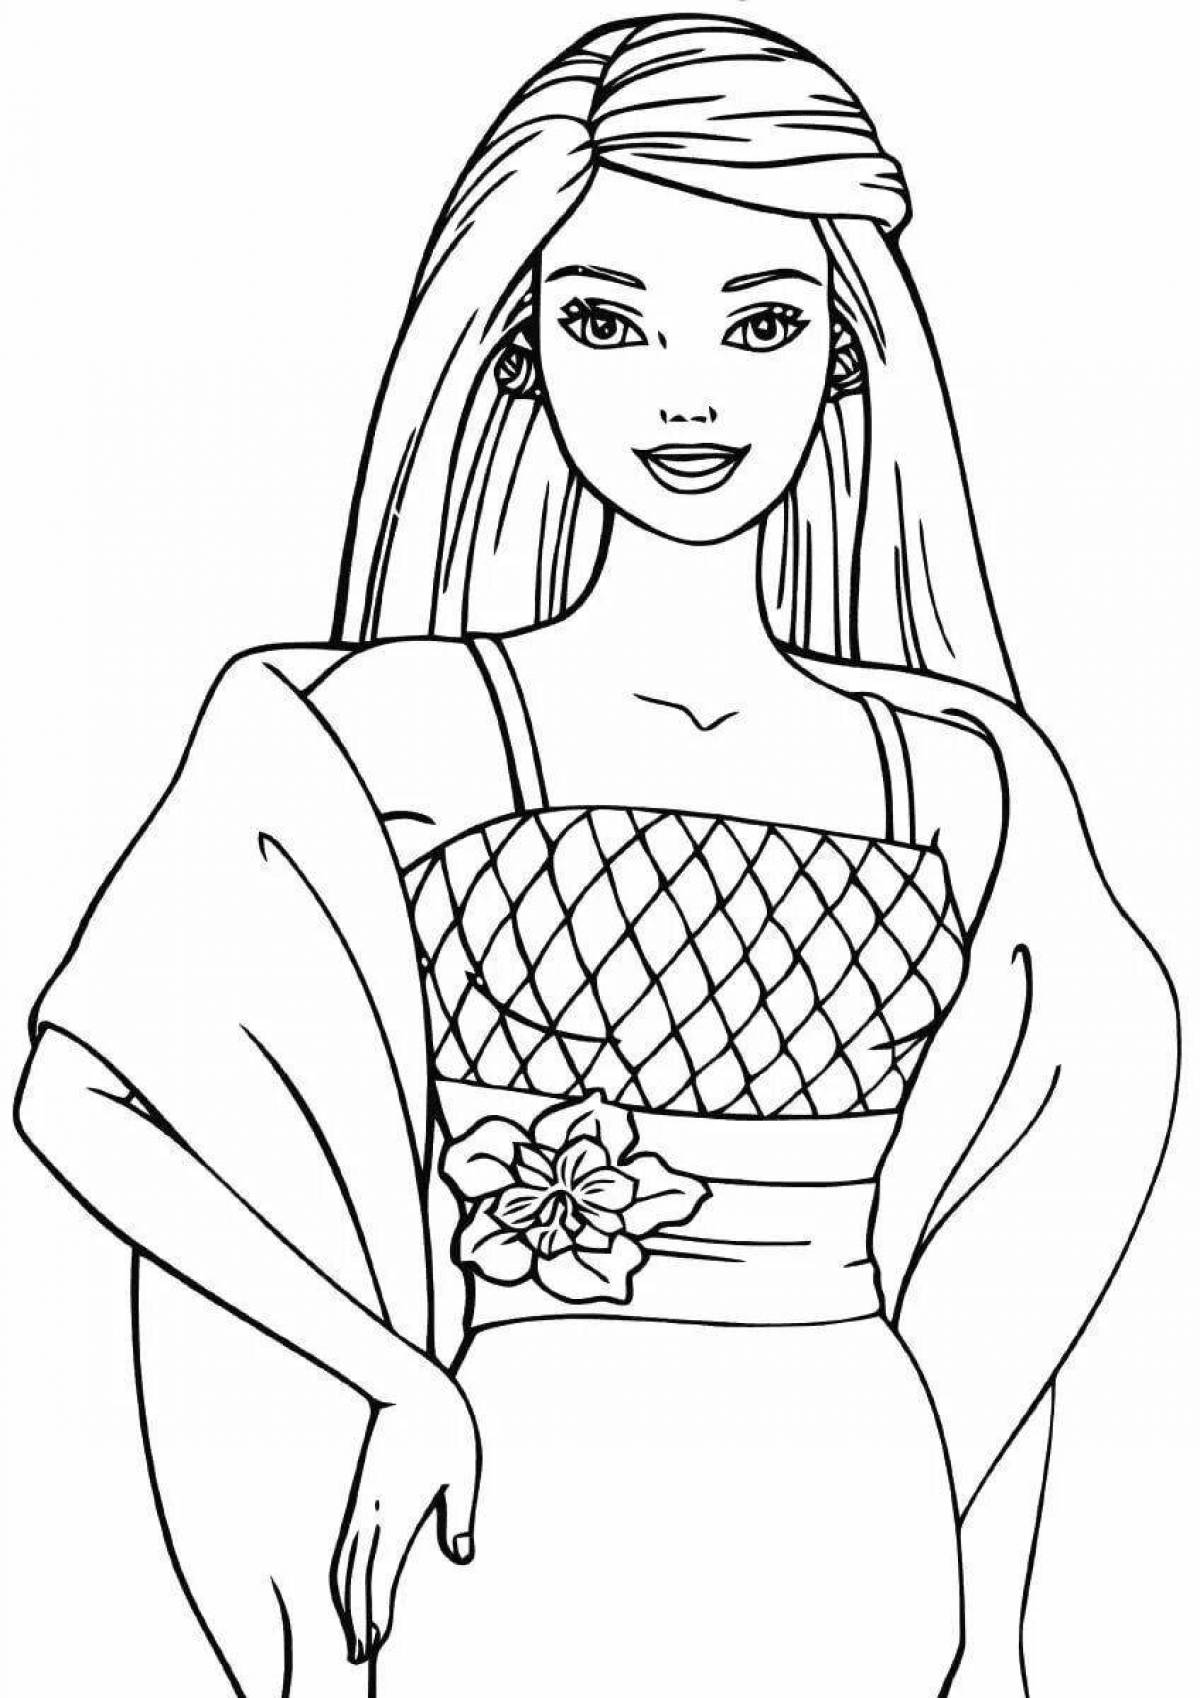 Barbie coloring book for kids 6-7 years old